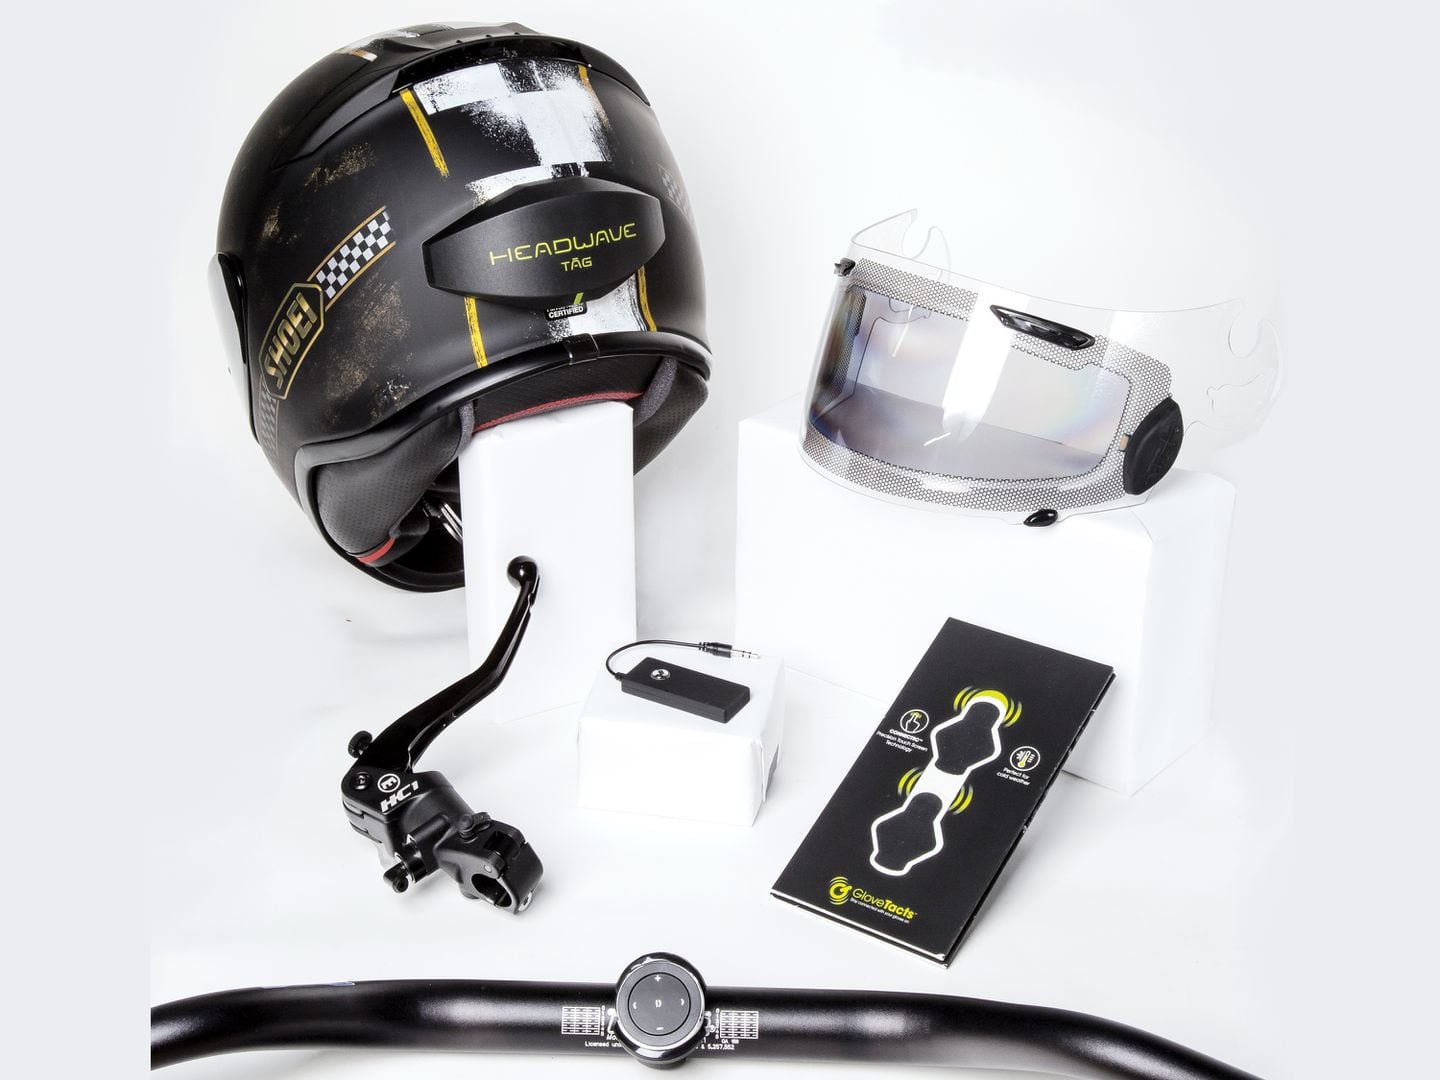 Motorcycle Accessories And Gadgets For You Motorcyclist